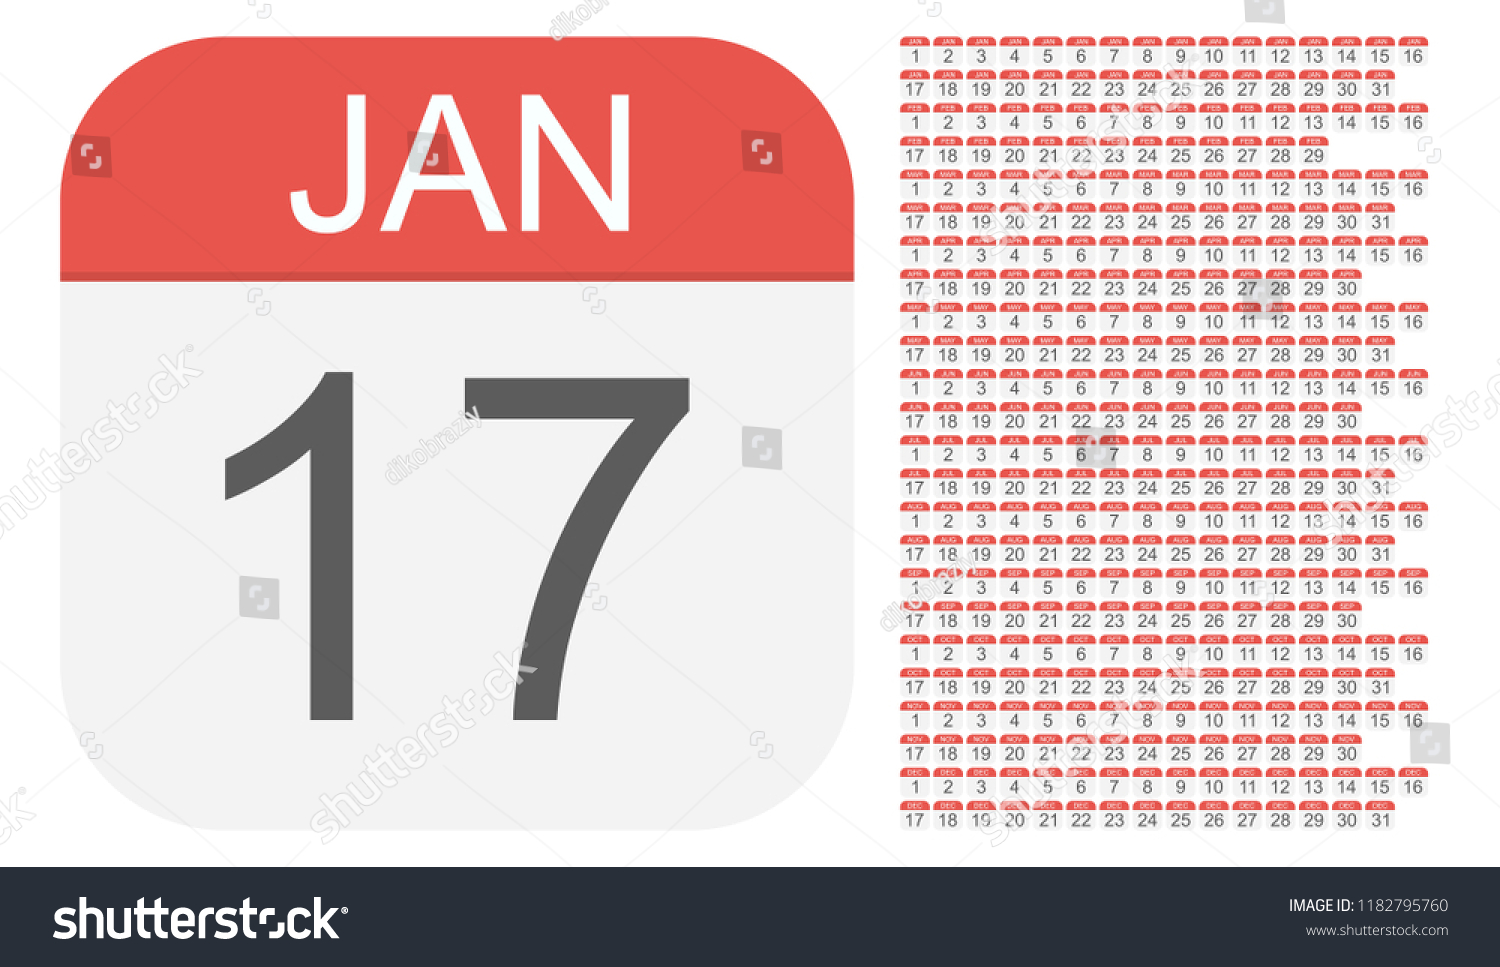 SVG of January 1 - December 31 - Calendar Icons. All days of year. Vector Illustration svg